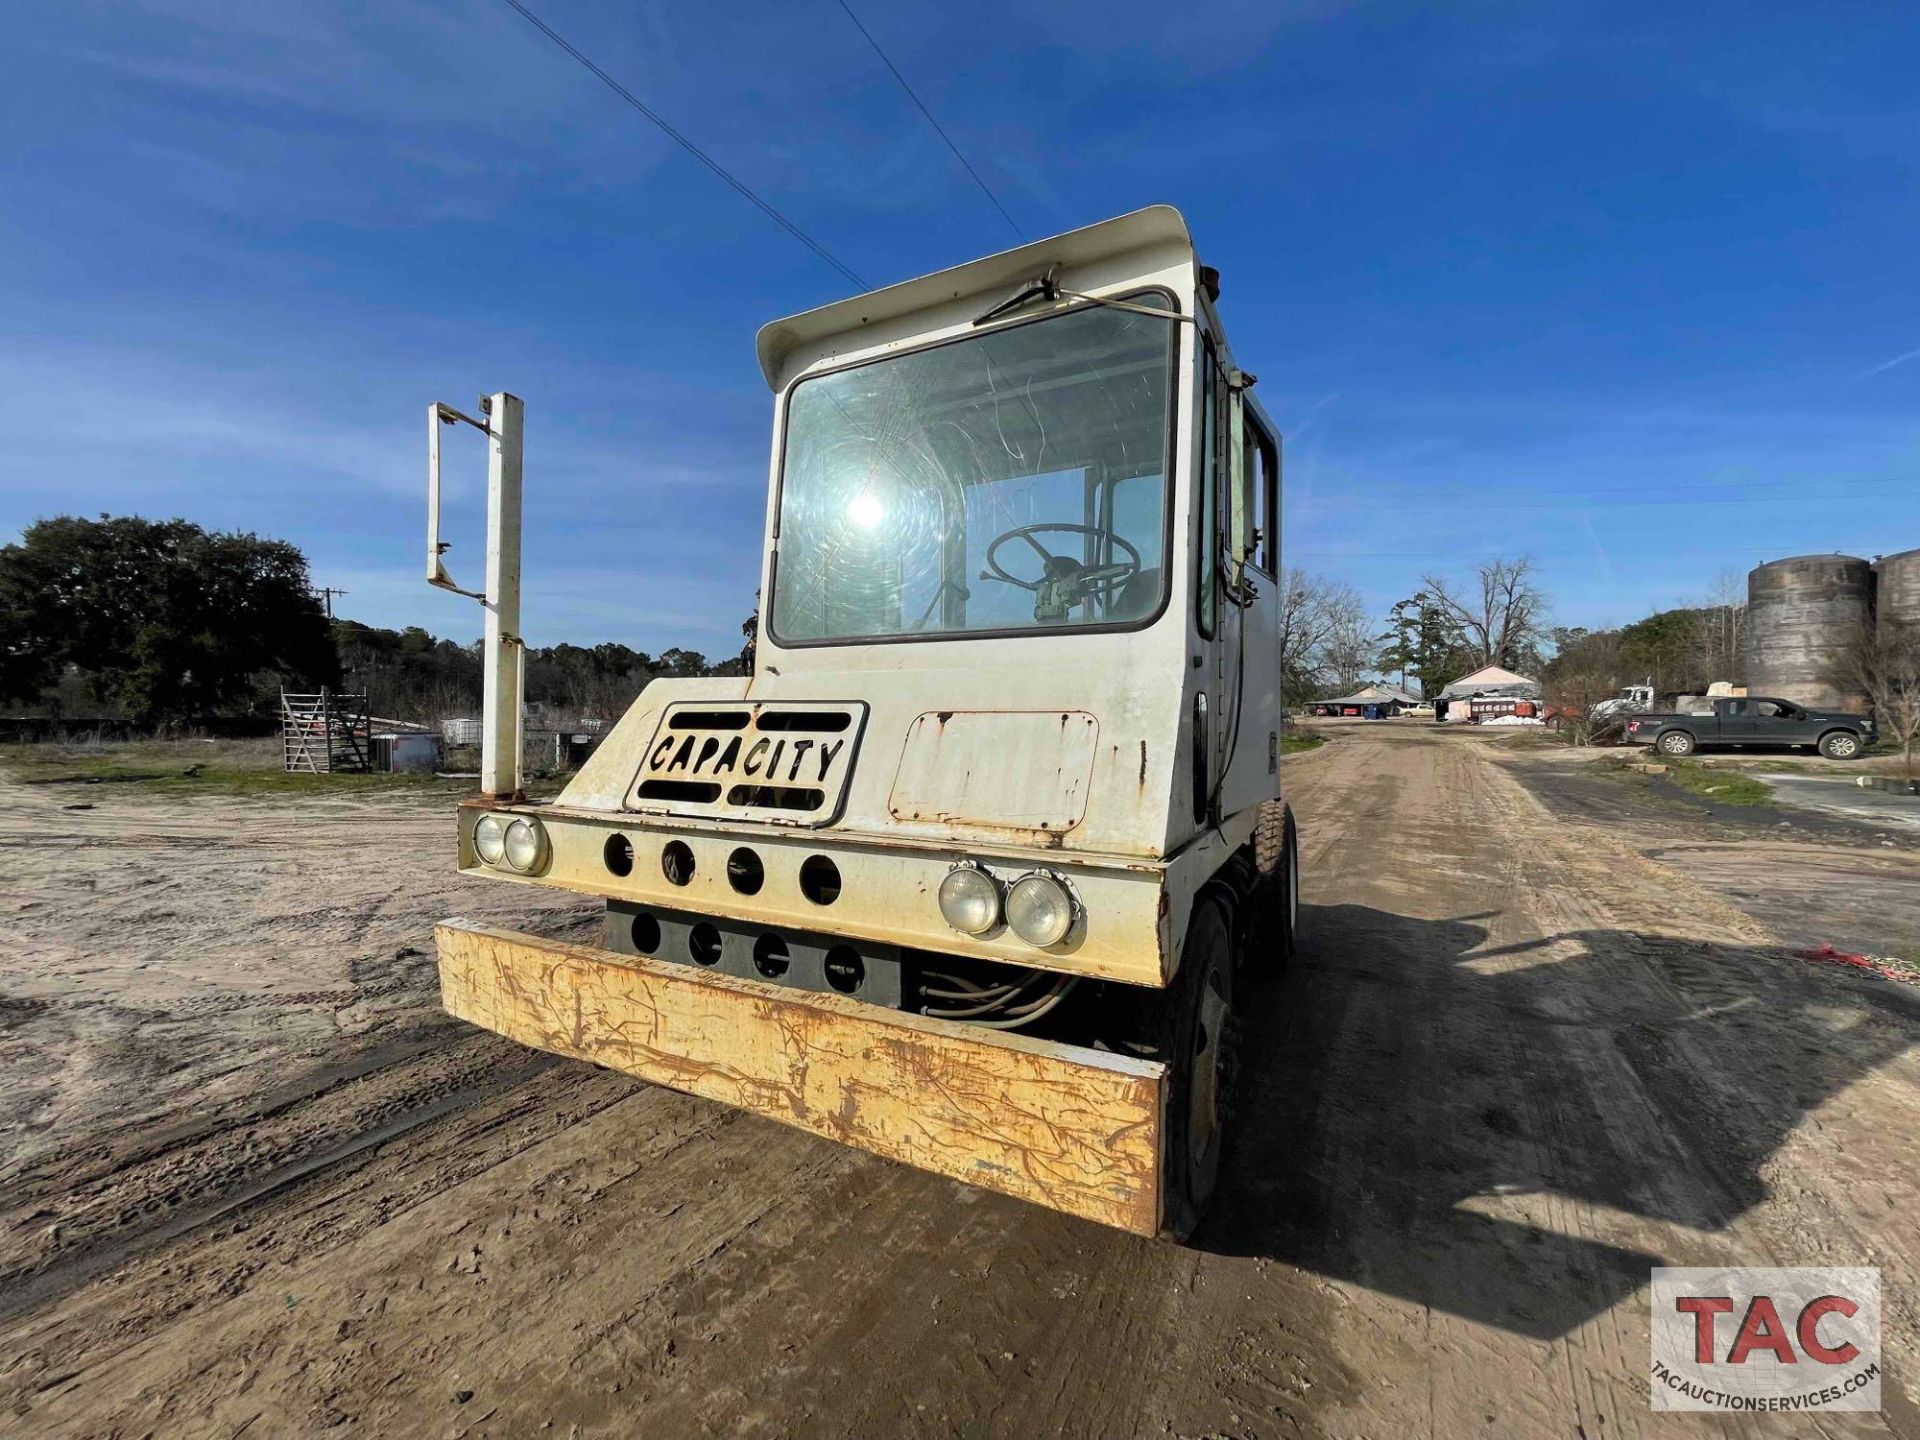 Capacity T400 Yard Spotter Truck - Image 9 of 37